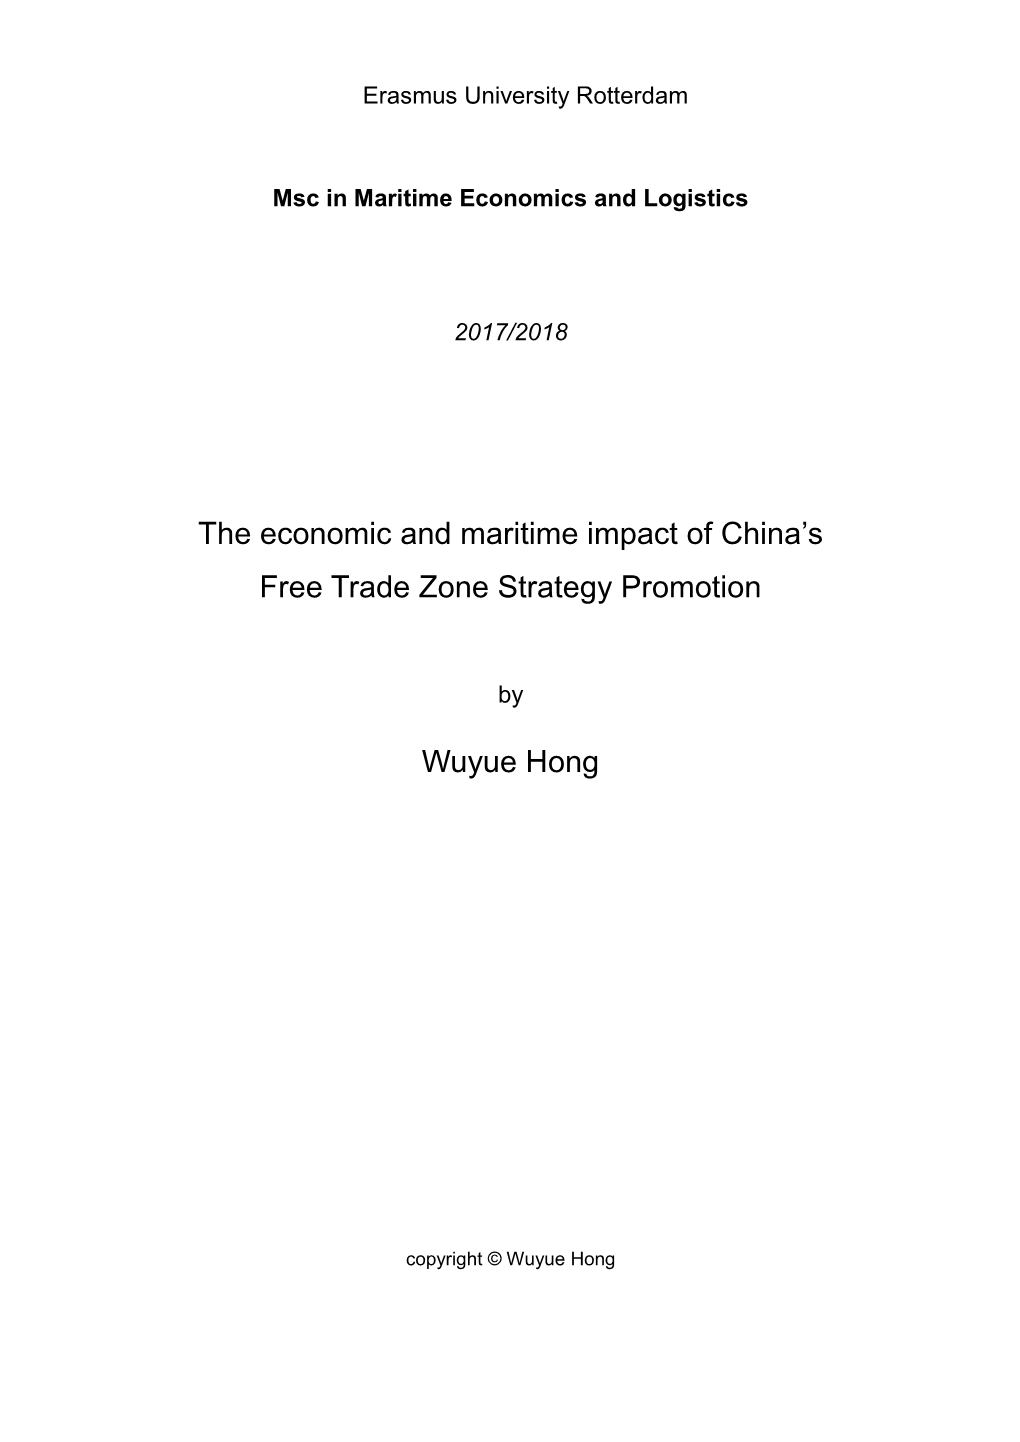 The Economic and Maritime Impact of China's Free Trade Zone Strategy